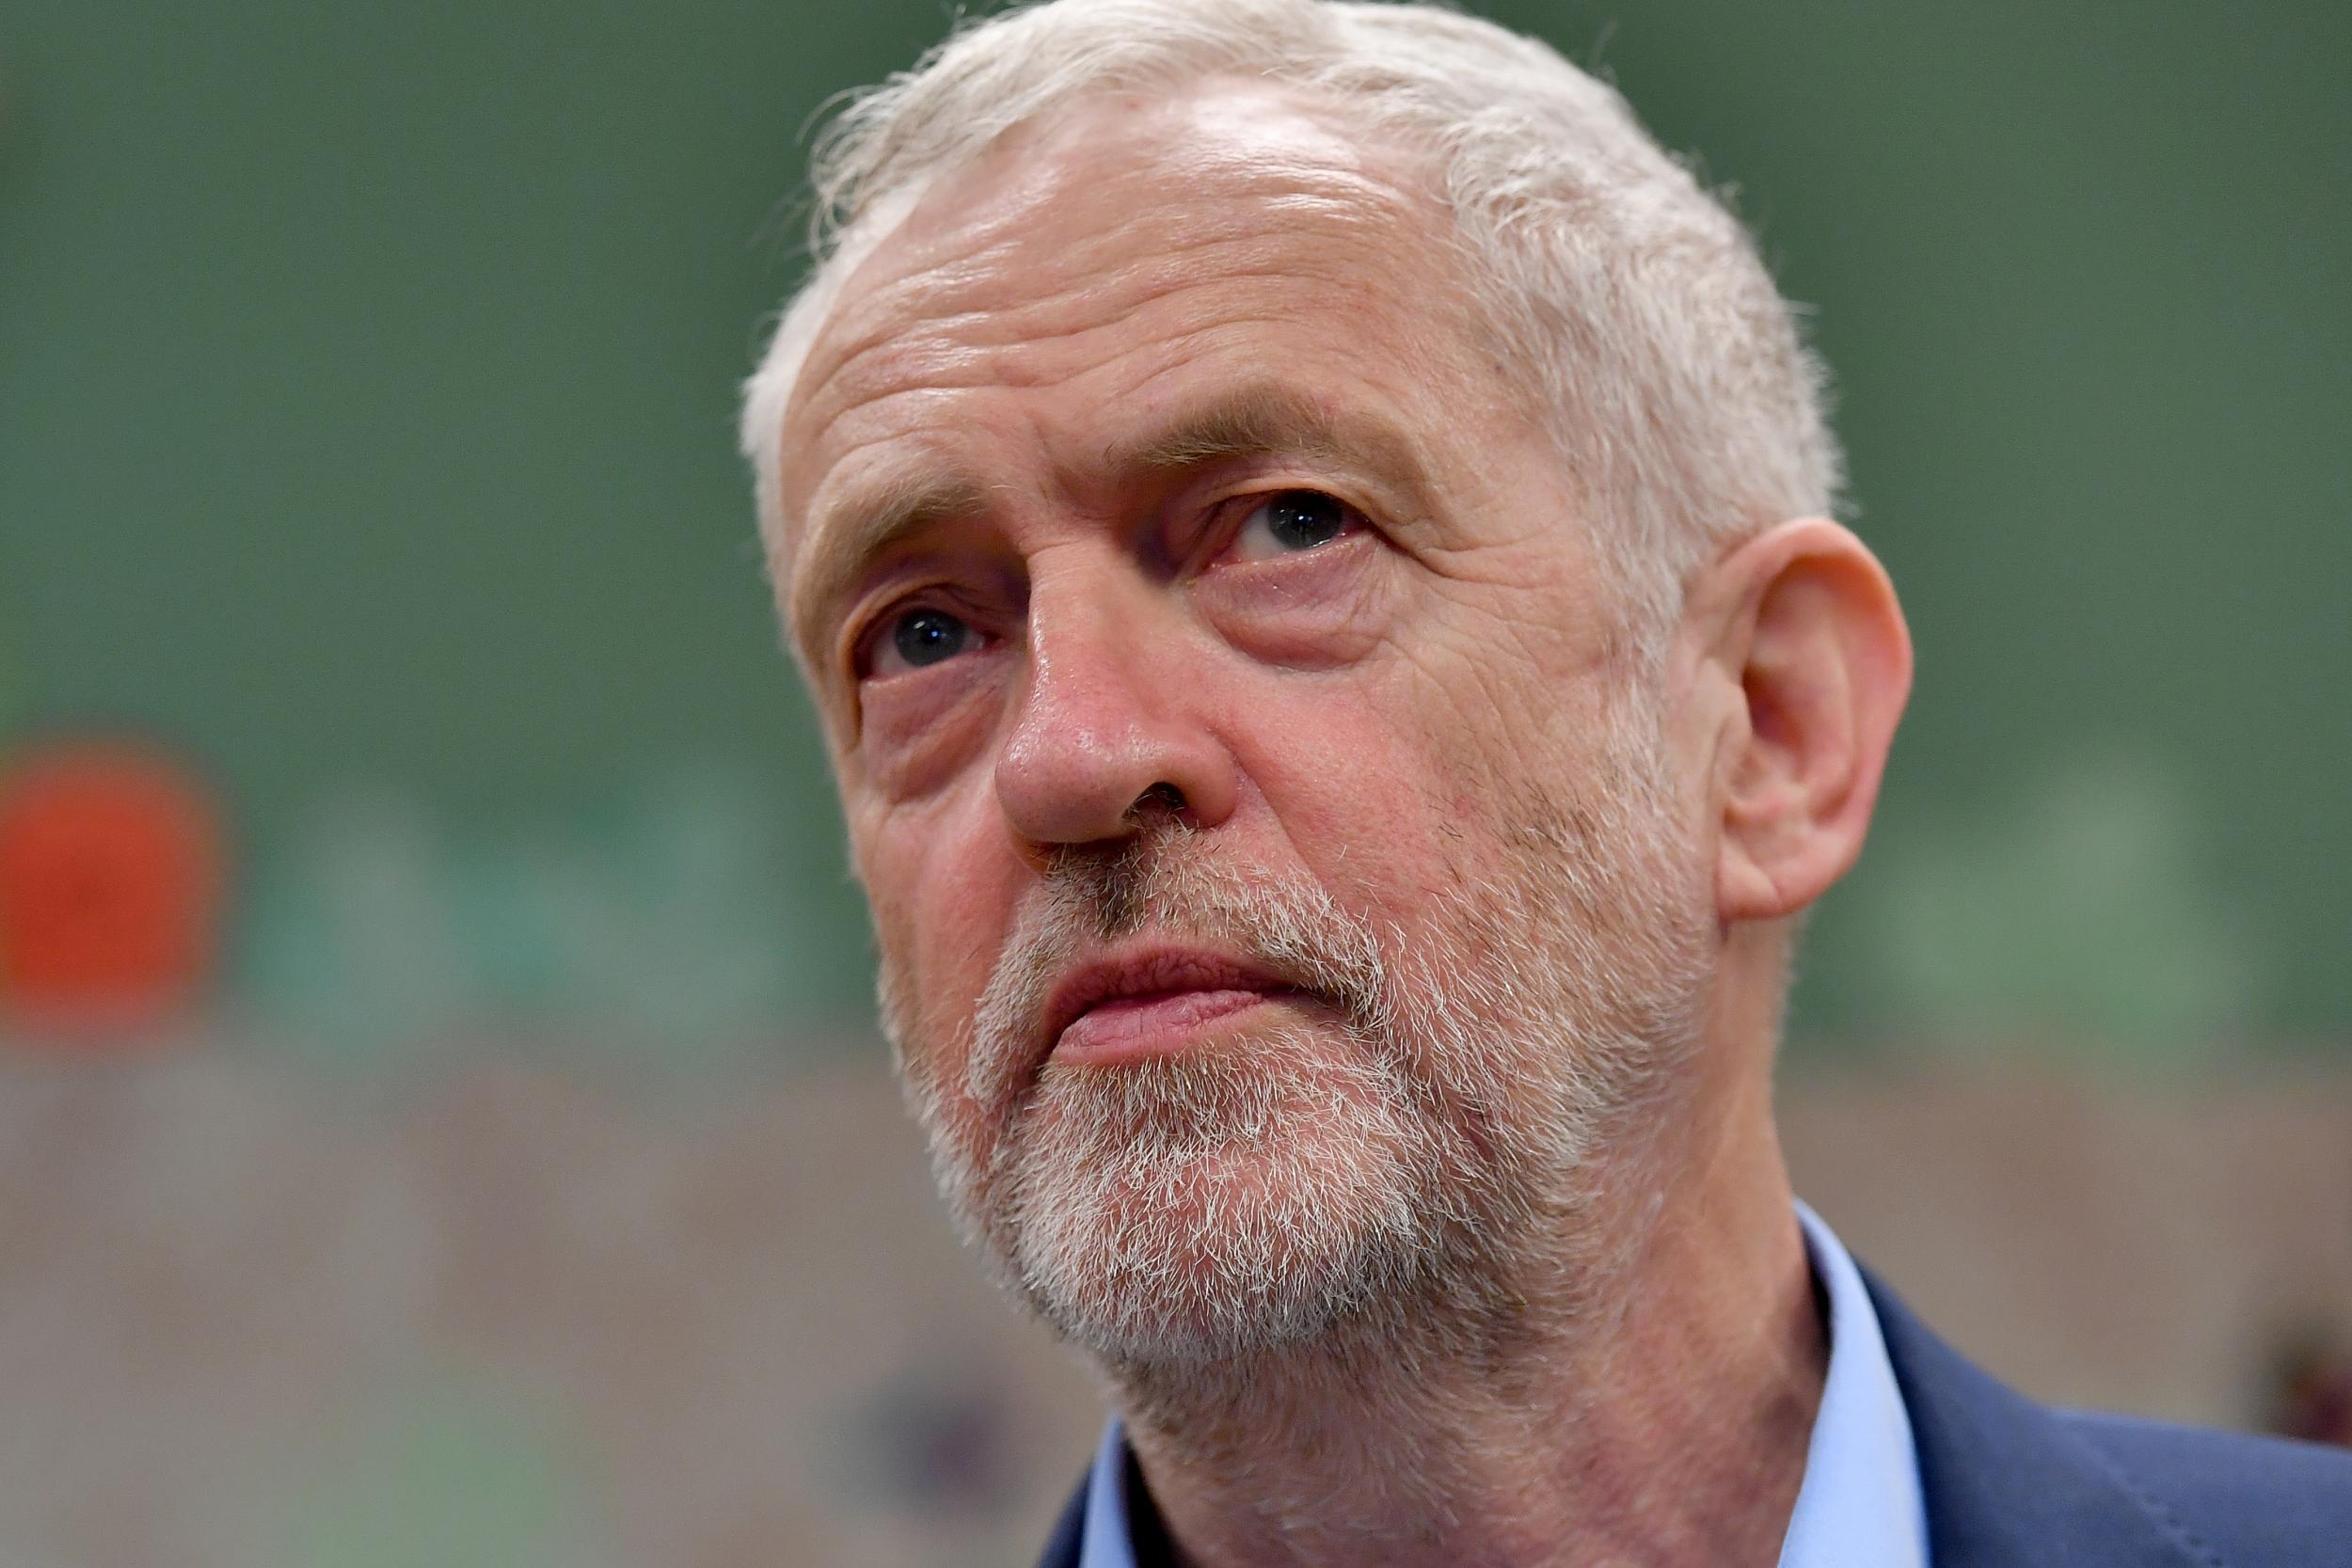 The polls add that the Labour leader's association with a policy is less toxic than some observers have predicted